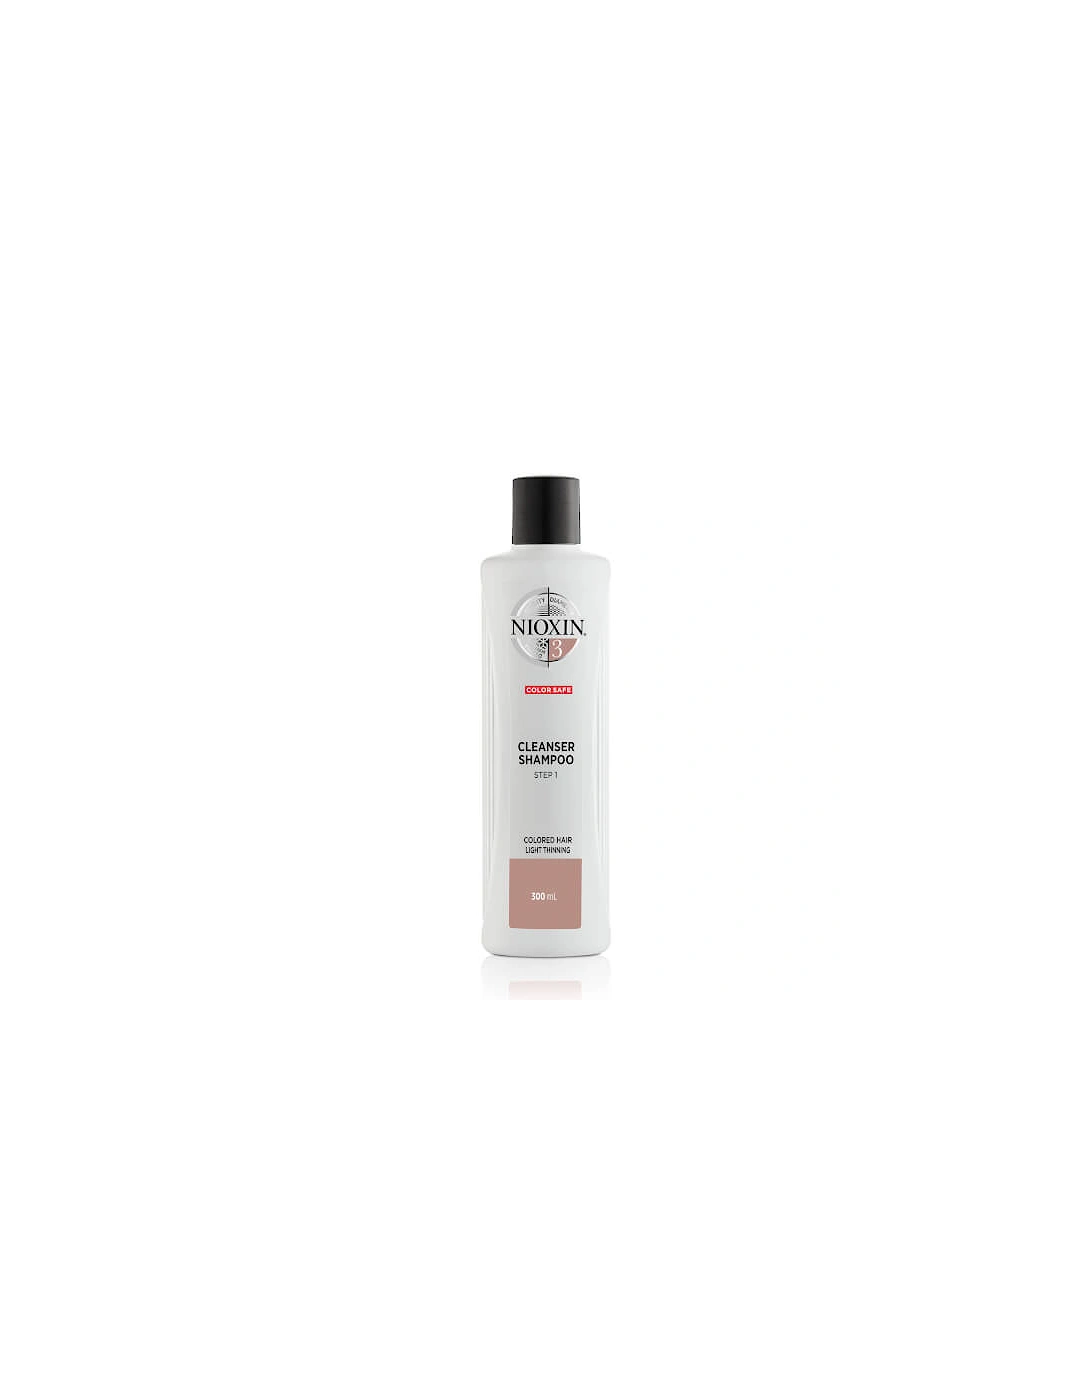 3-Part System 3 Cleanser Shampoo for Coloured Hair with Light Thinning 300ml, 2 of 1